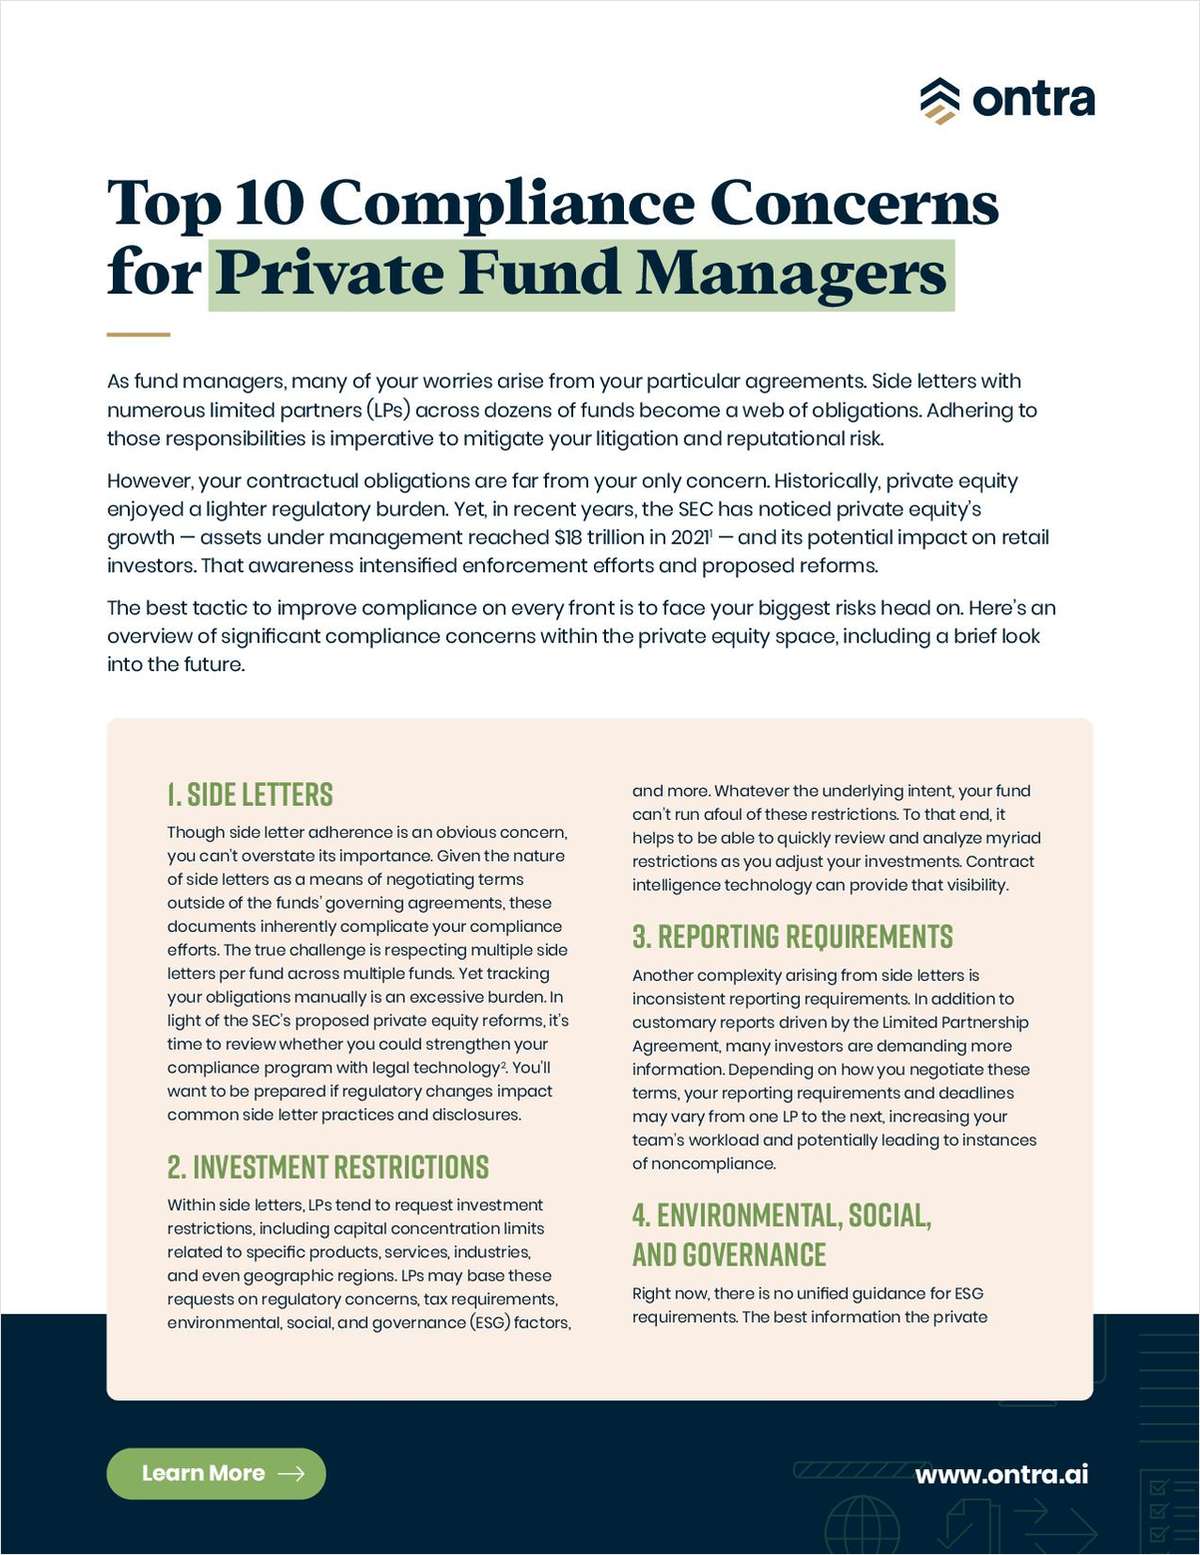 As private equity fund managers, remaining compliant on every front is critical as the SEC continues to intensify enforcement efforts and propose reforms. Learn how to improve your compliance and face your biggest risks head on in this guide.